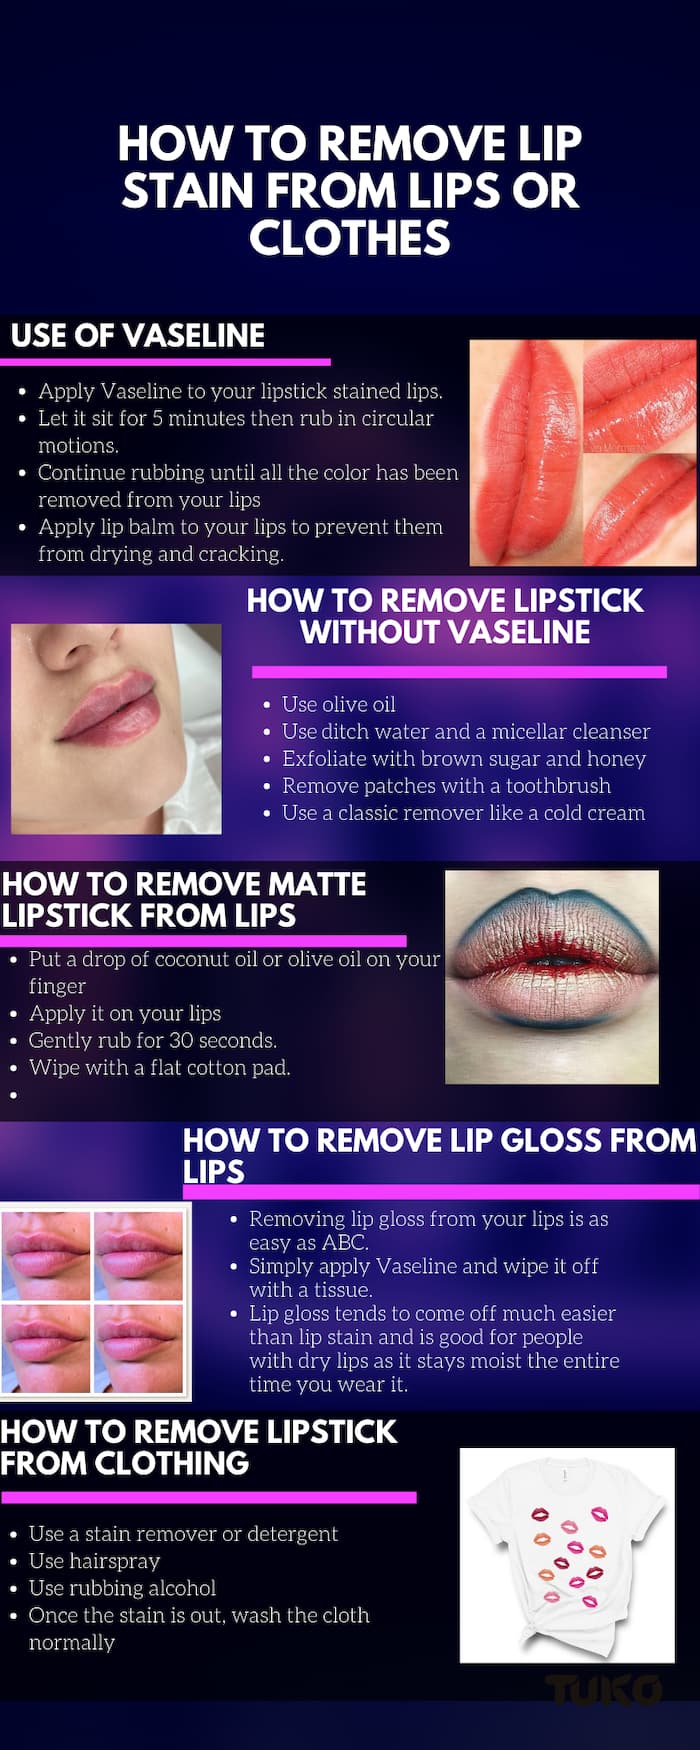 A comprehensive guide on how to remove lip stain from lips